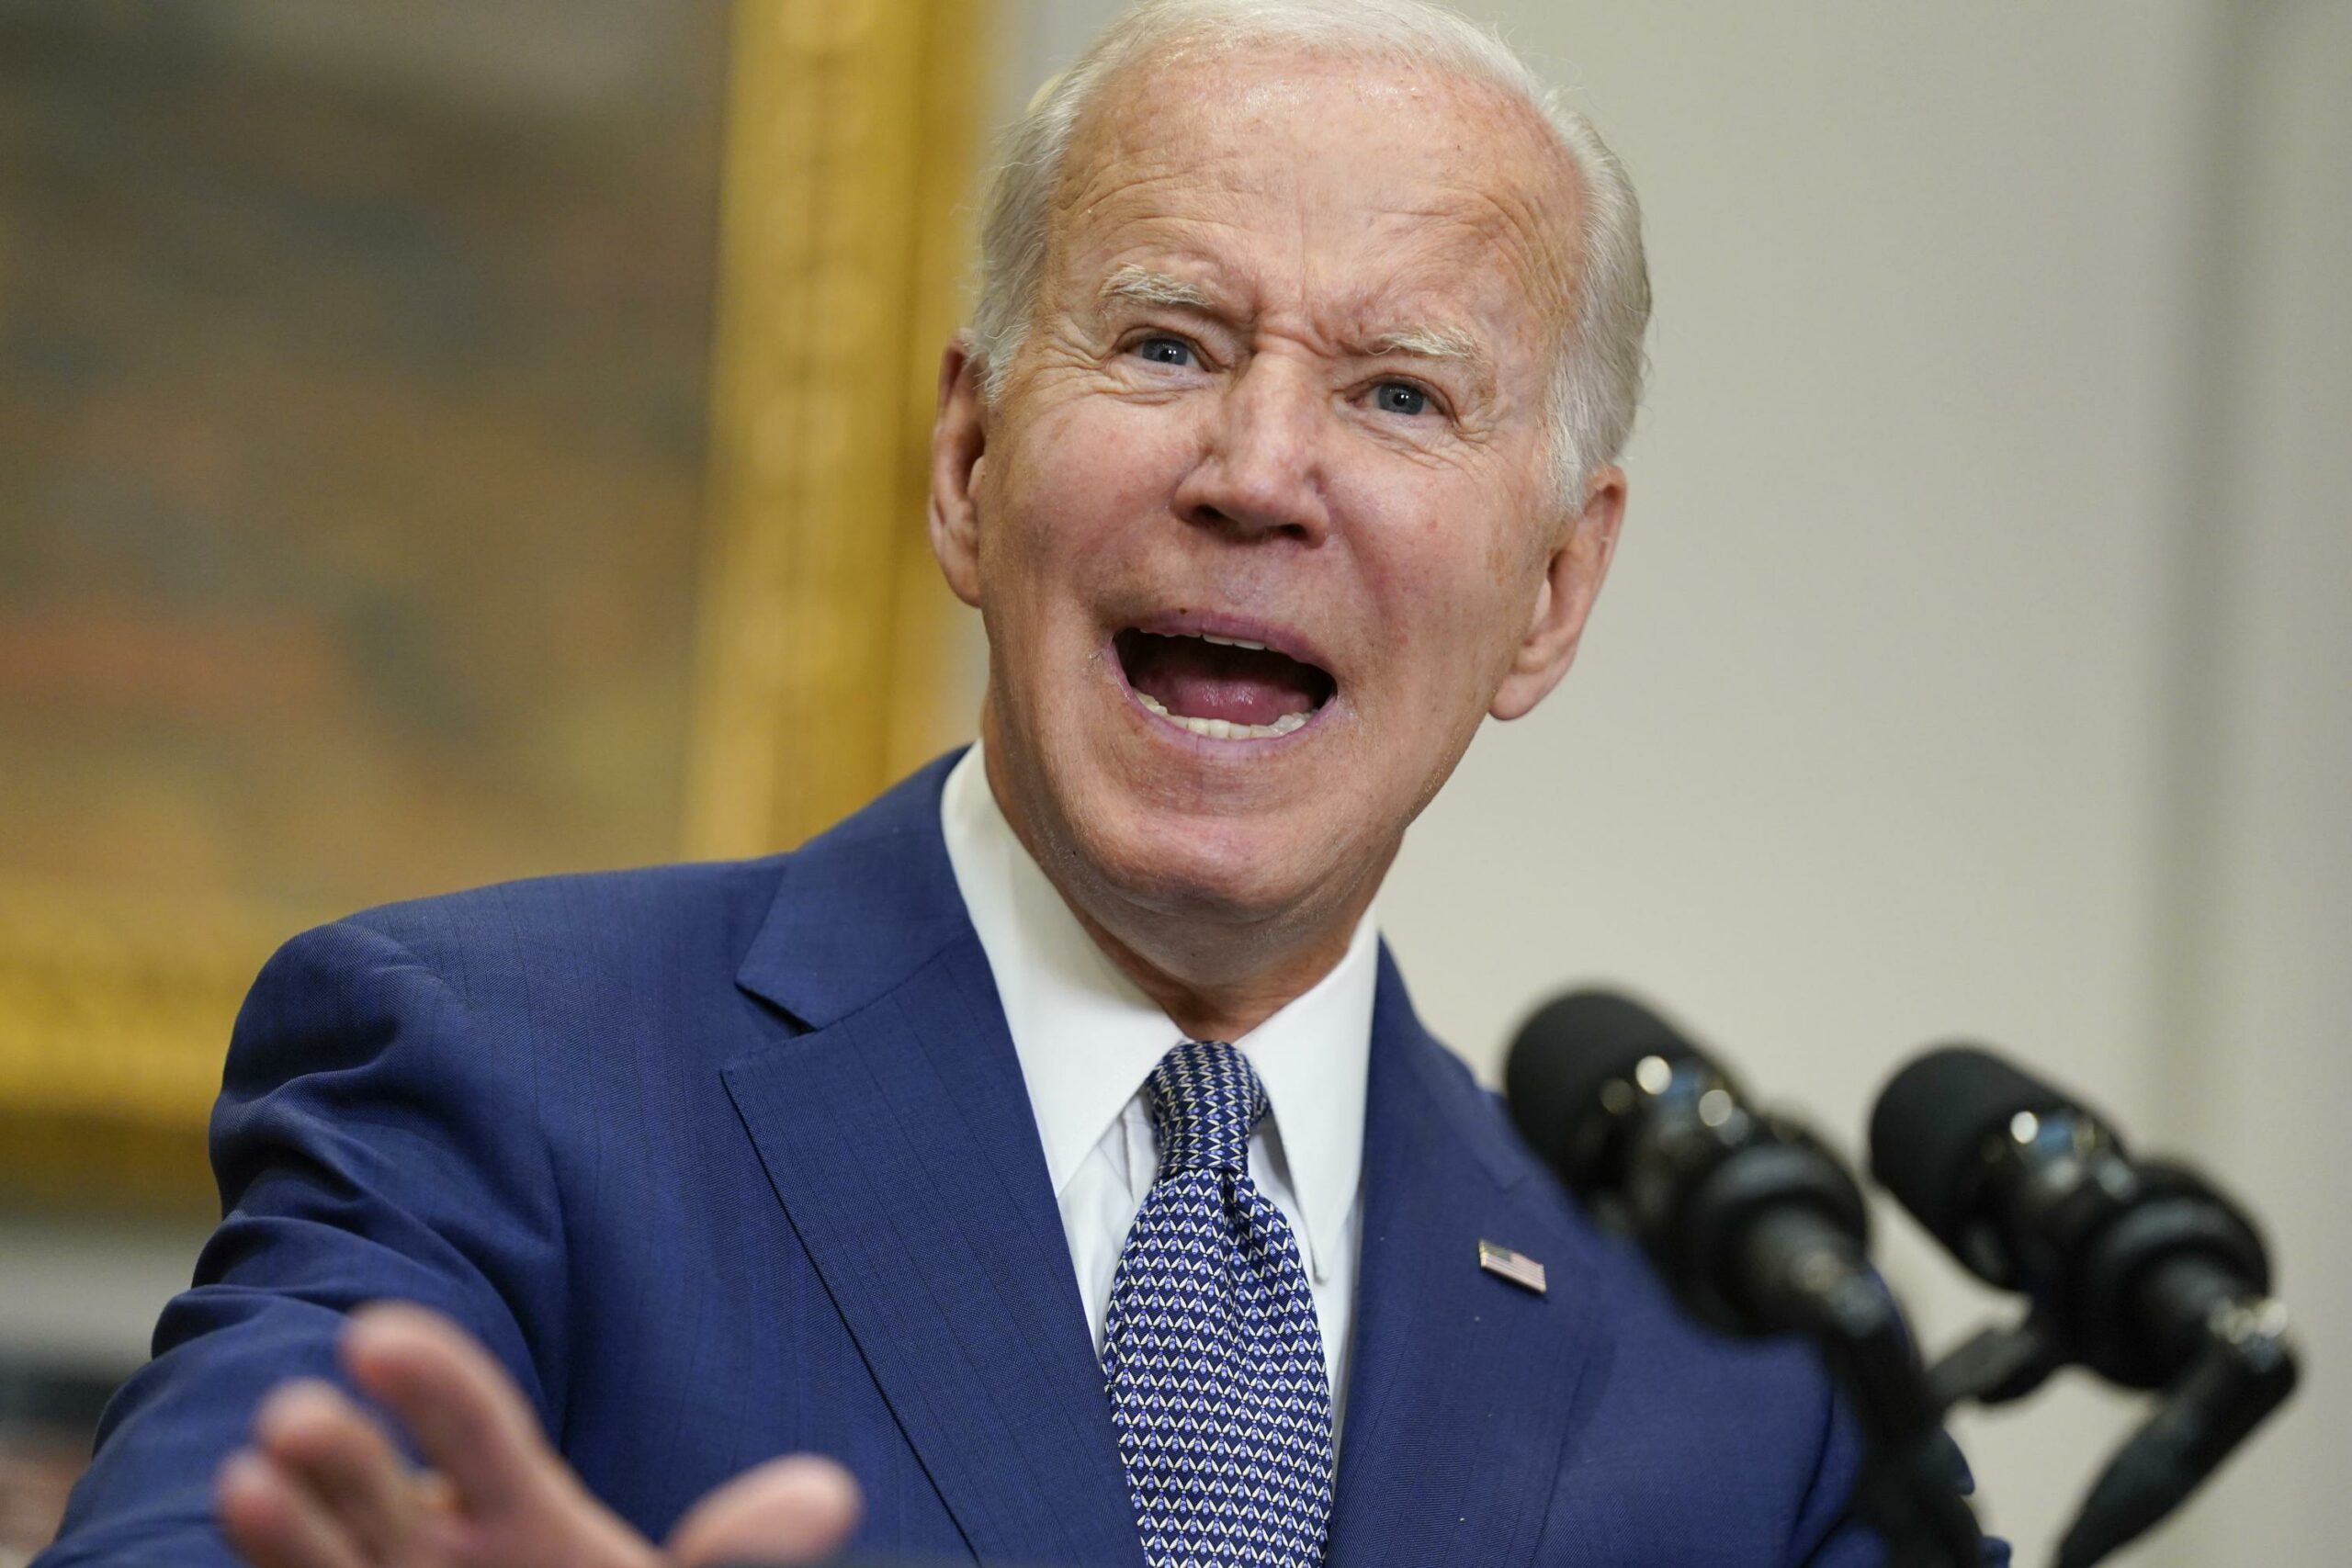 Biden is the most radical abortion activist ever to hold presidential office (& other stories)